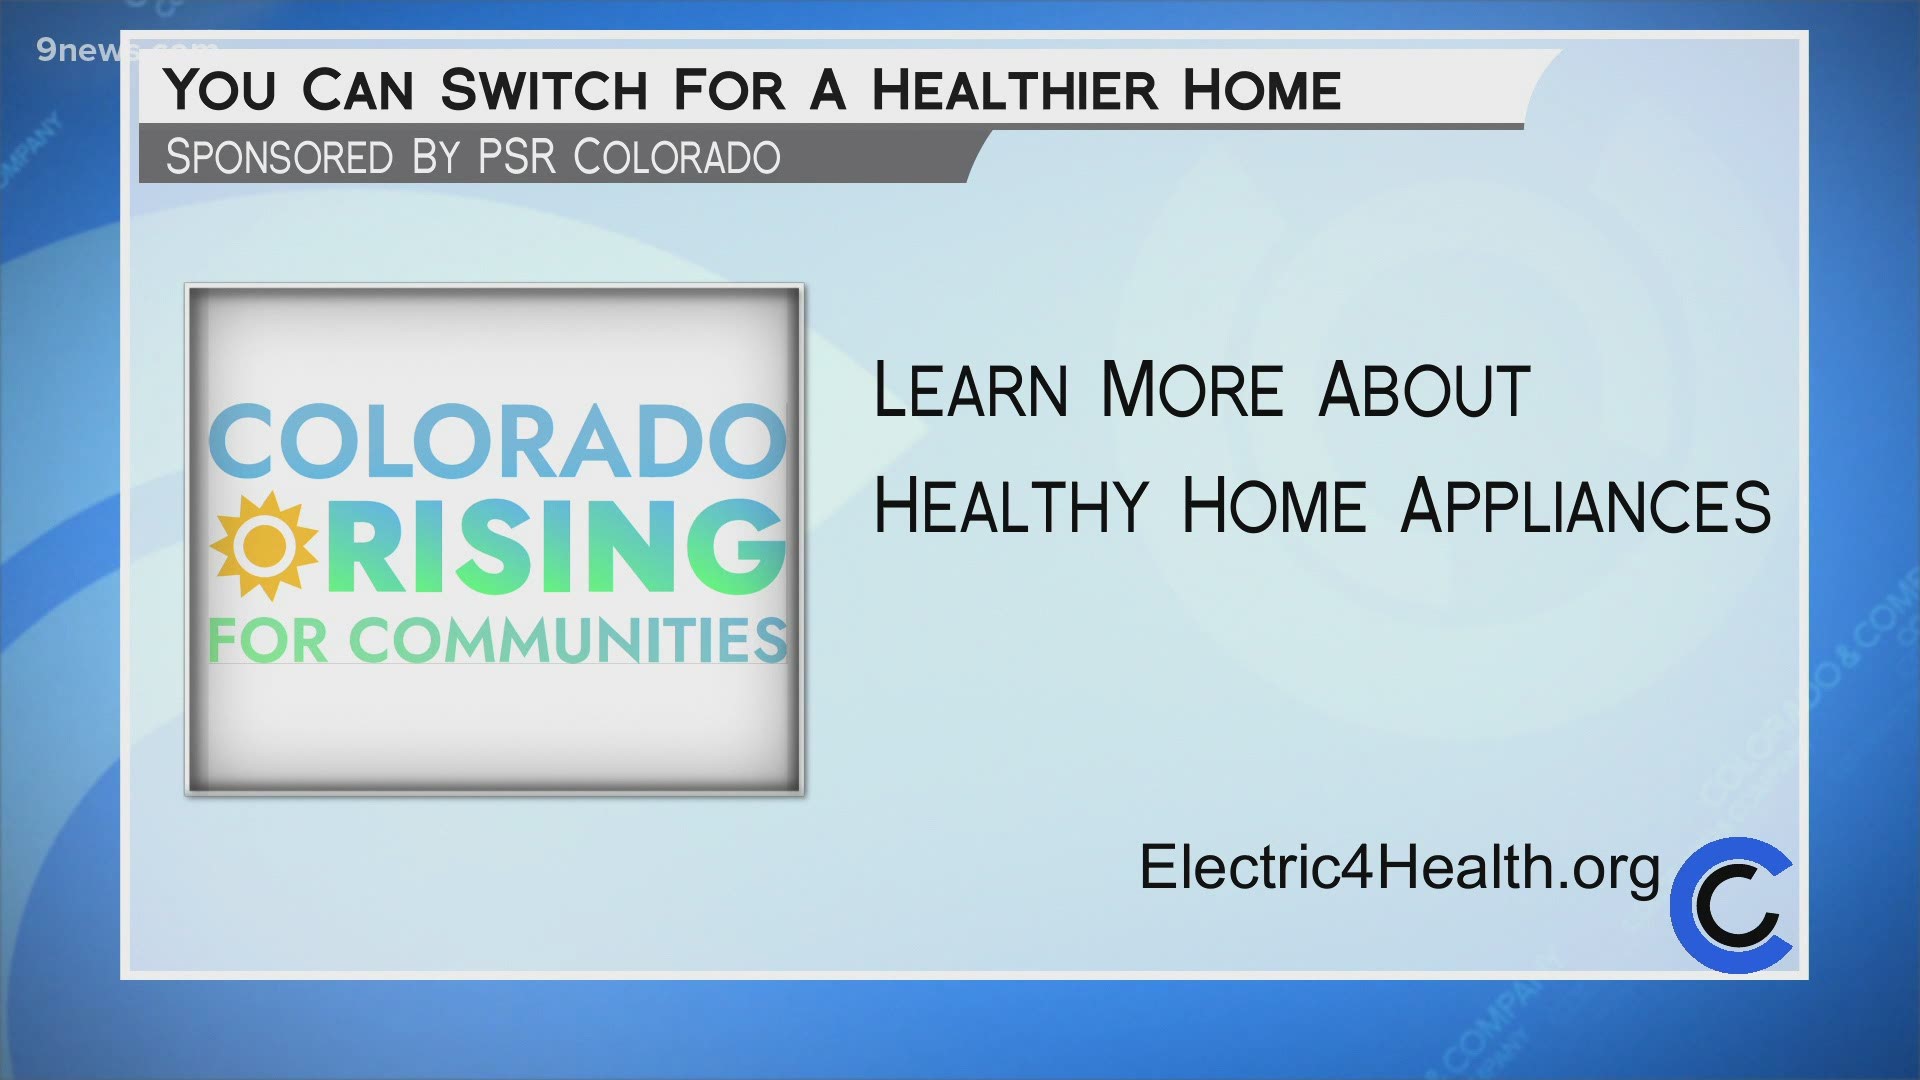 Learn more about home appliances that are better for you and the environment at Electric4Health.org.